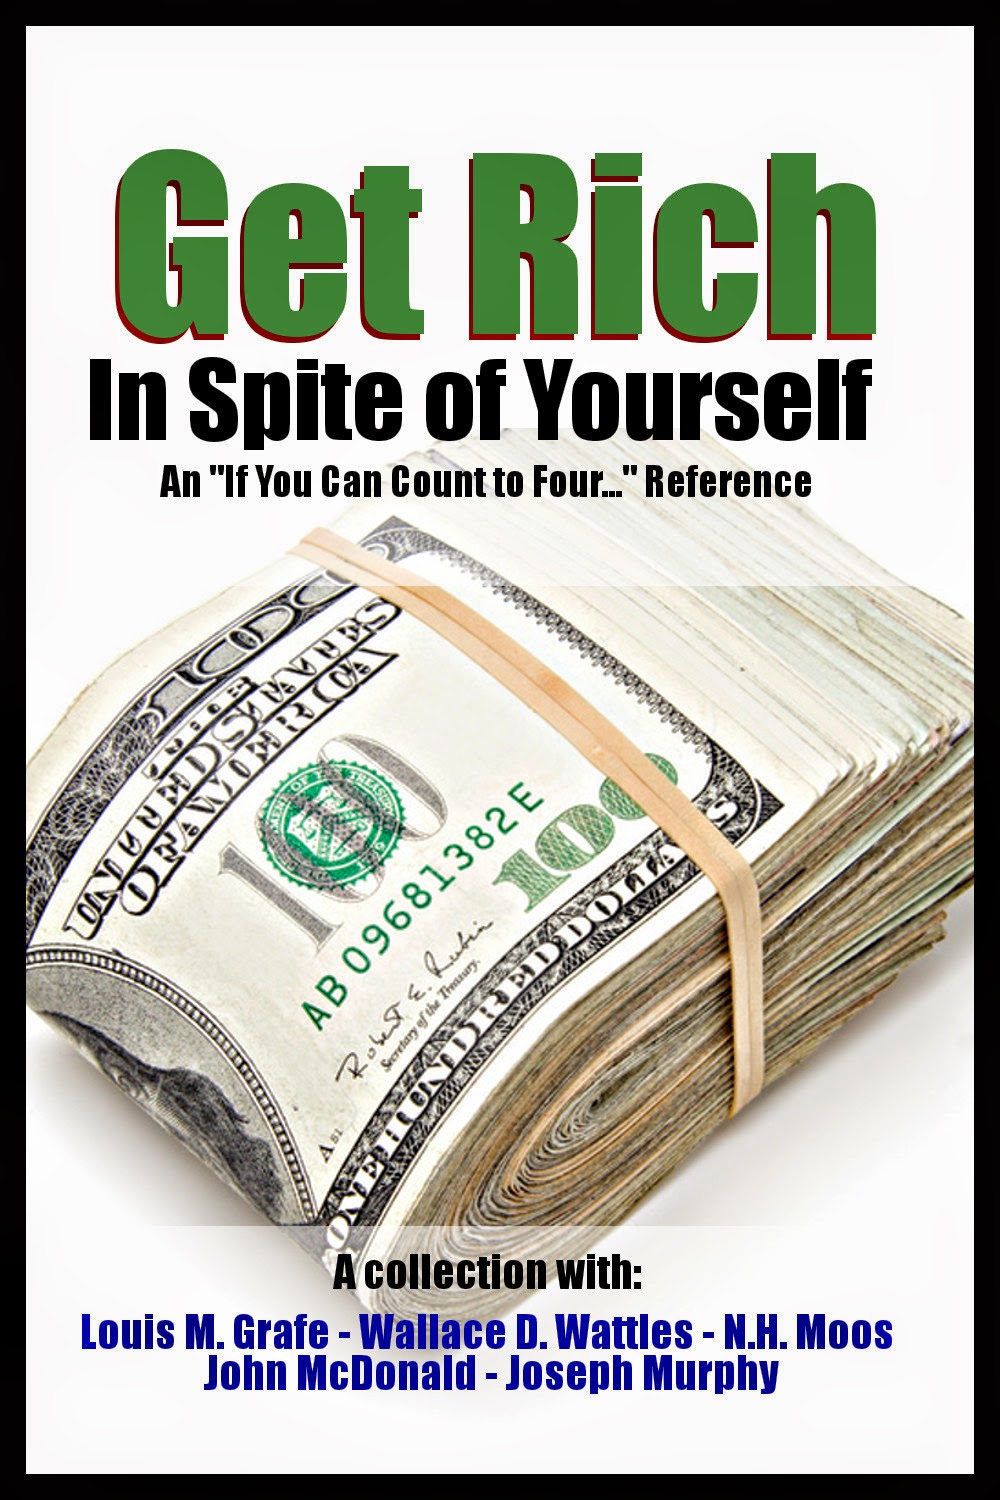 New Release: The "Get Rich In Spite of Yourself" Collection by Louis M. Grafe, Wallace D. Wattles, N. H. Moos, John McDonalds, and Joseph Murphy